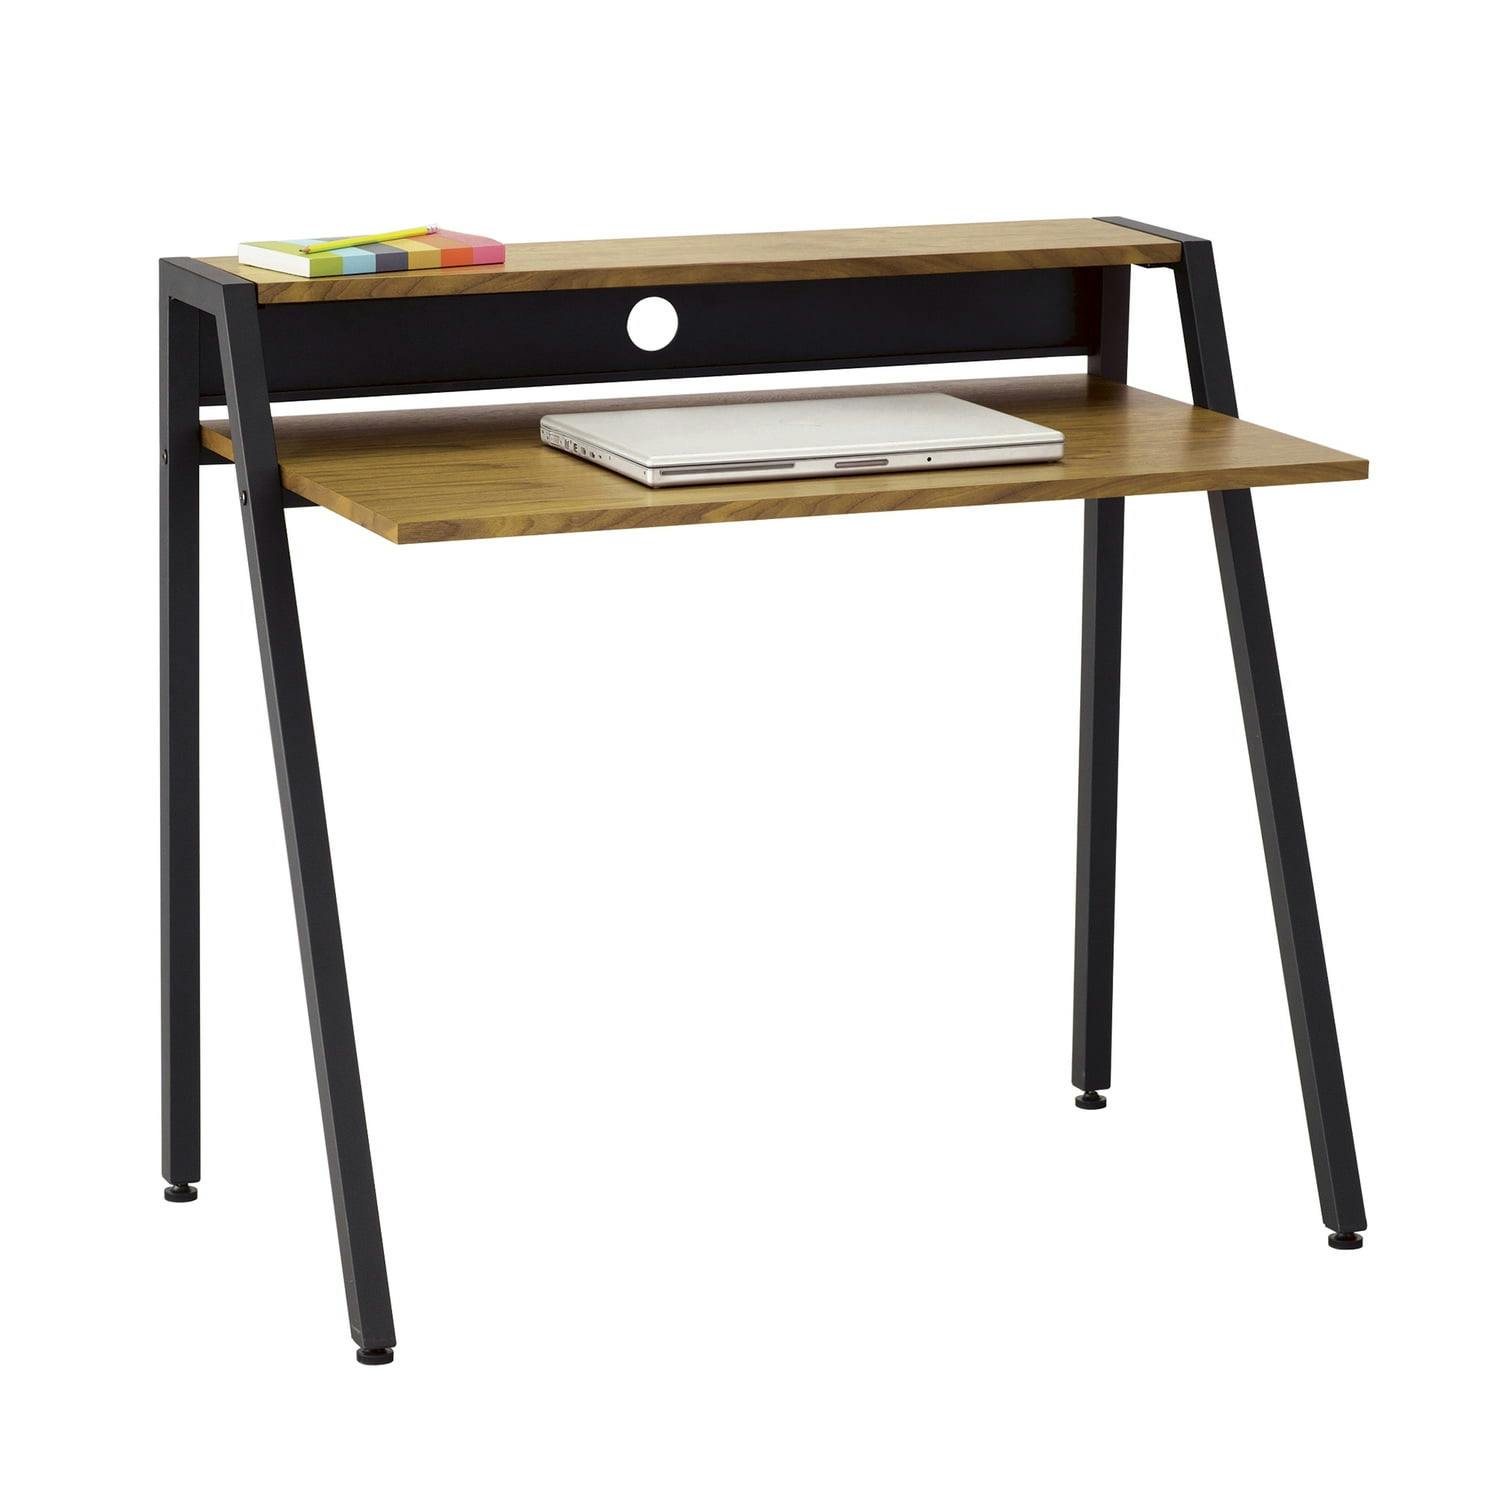 Safco Compact Black Wood Writing Desk with Dual-Level Workspace